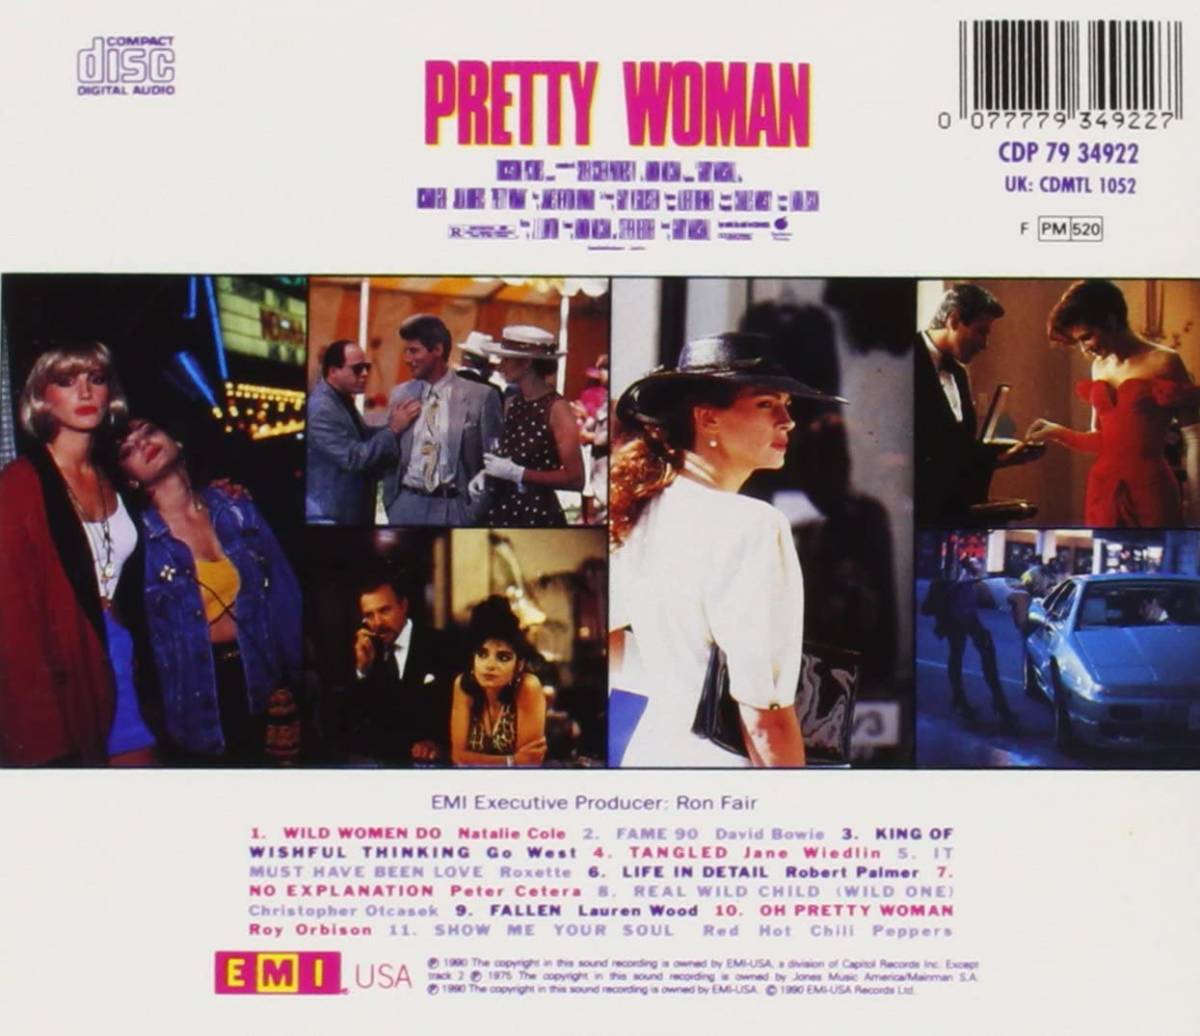 PRETTY WOMAN Go West レッド・ホット・チリ・ペッパーズ 輸入盤CD_画像2